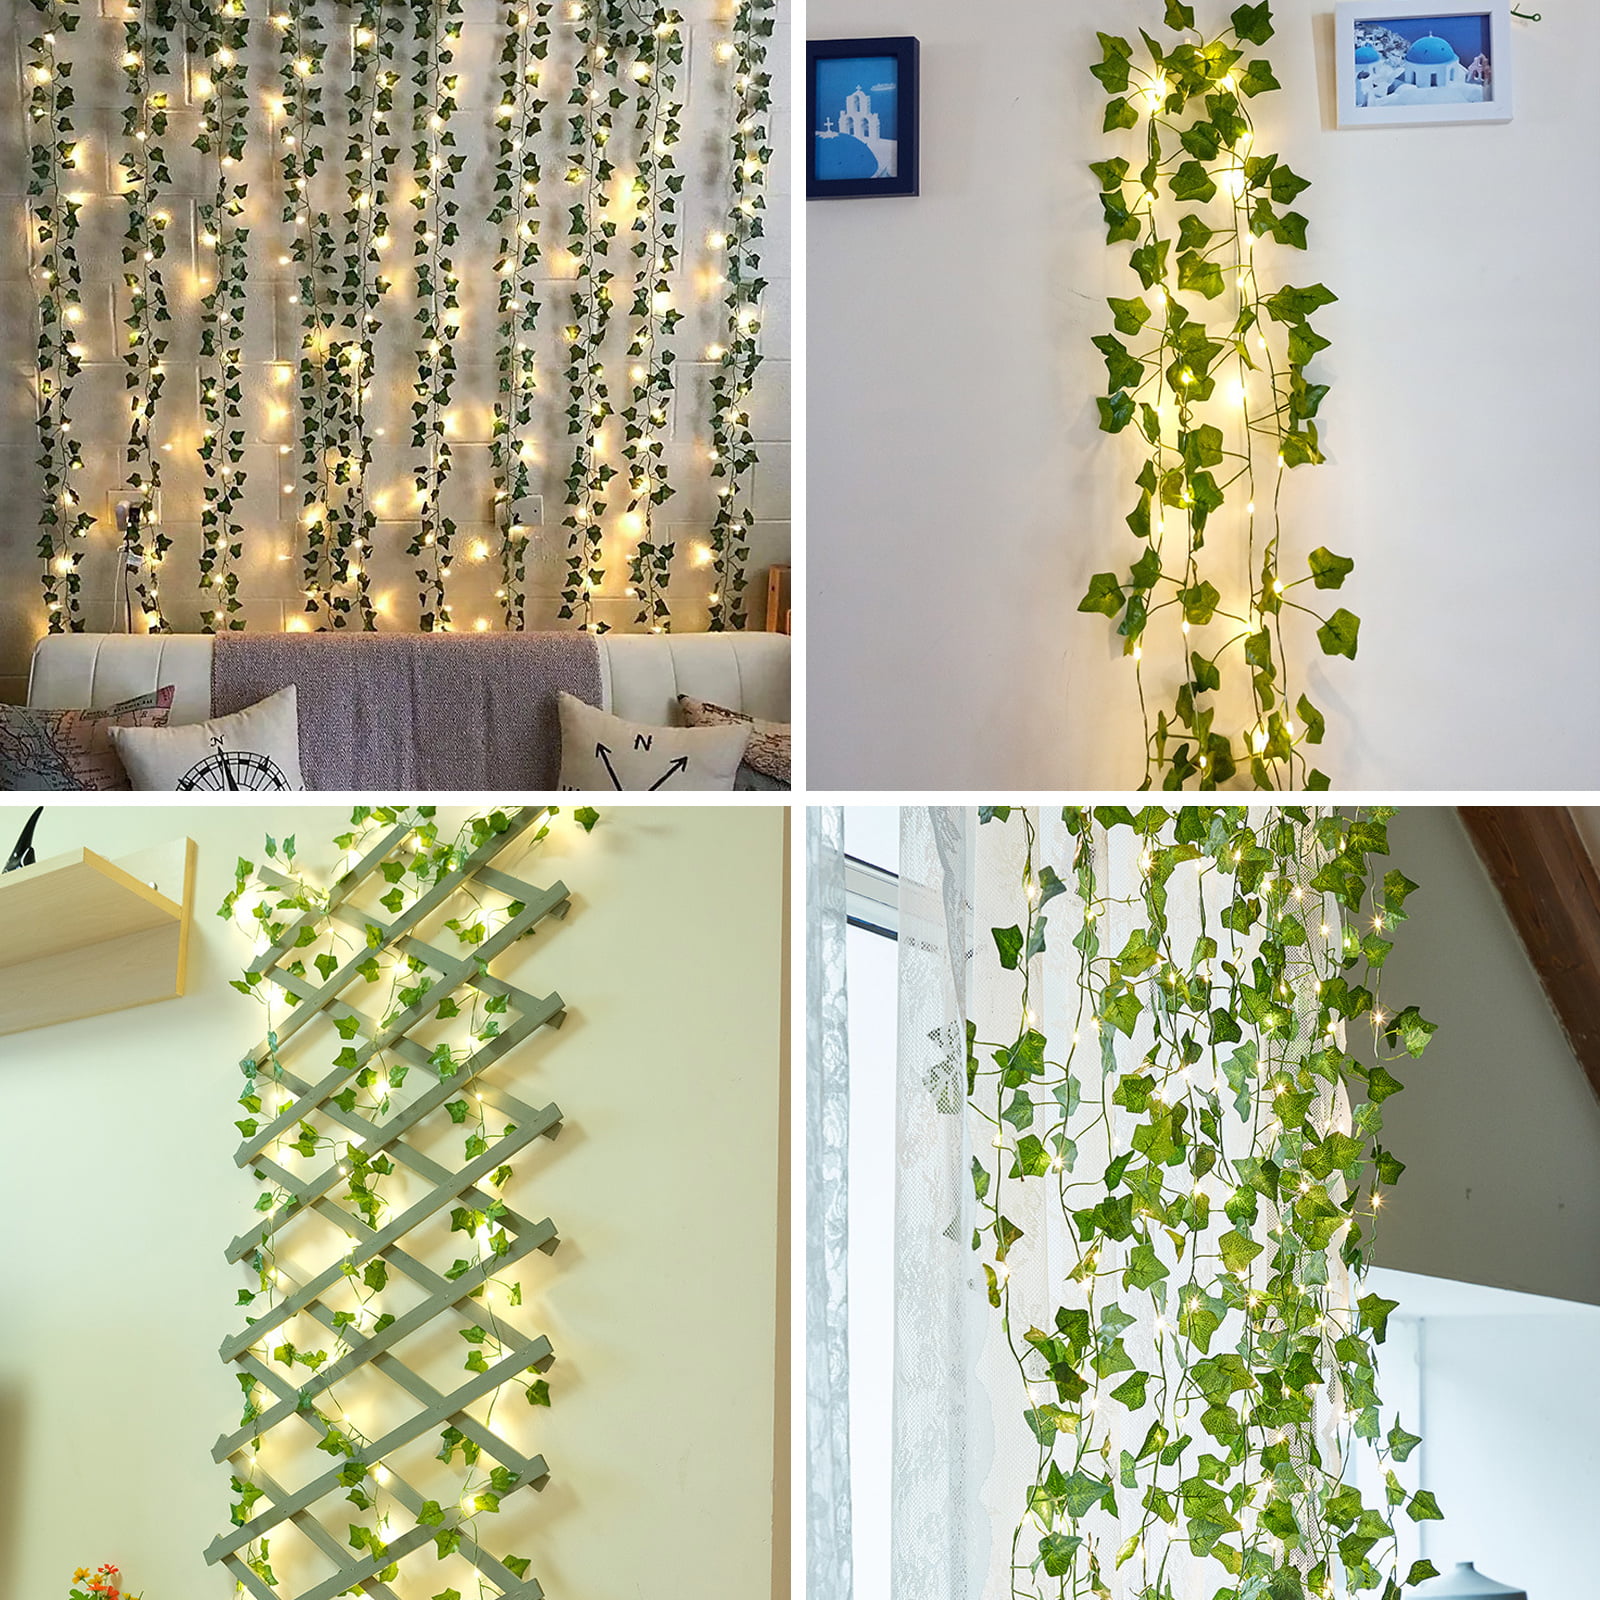 Fancy Solar LED Creeper Garland Fairy String Lights Hanging Lights for Home  Kitchen Garden Office Wedding Wall Decor 10M 100LED 